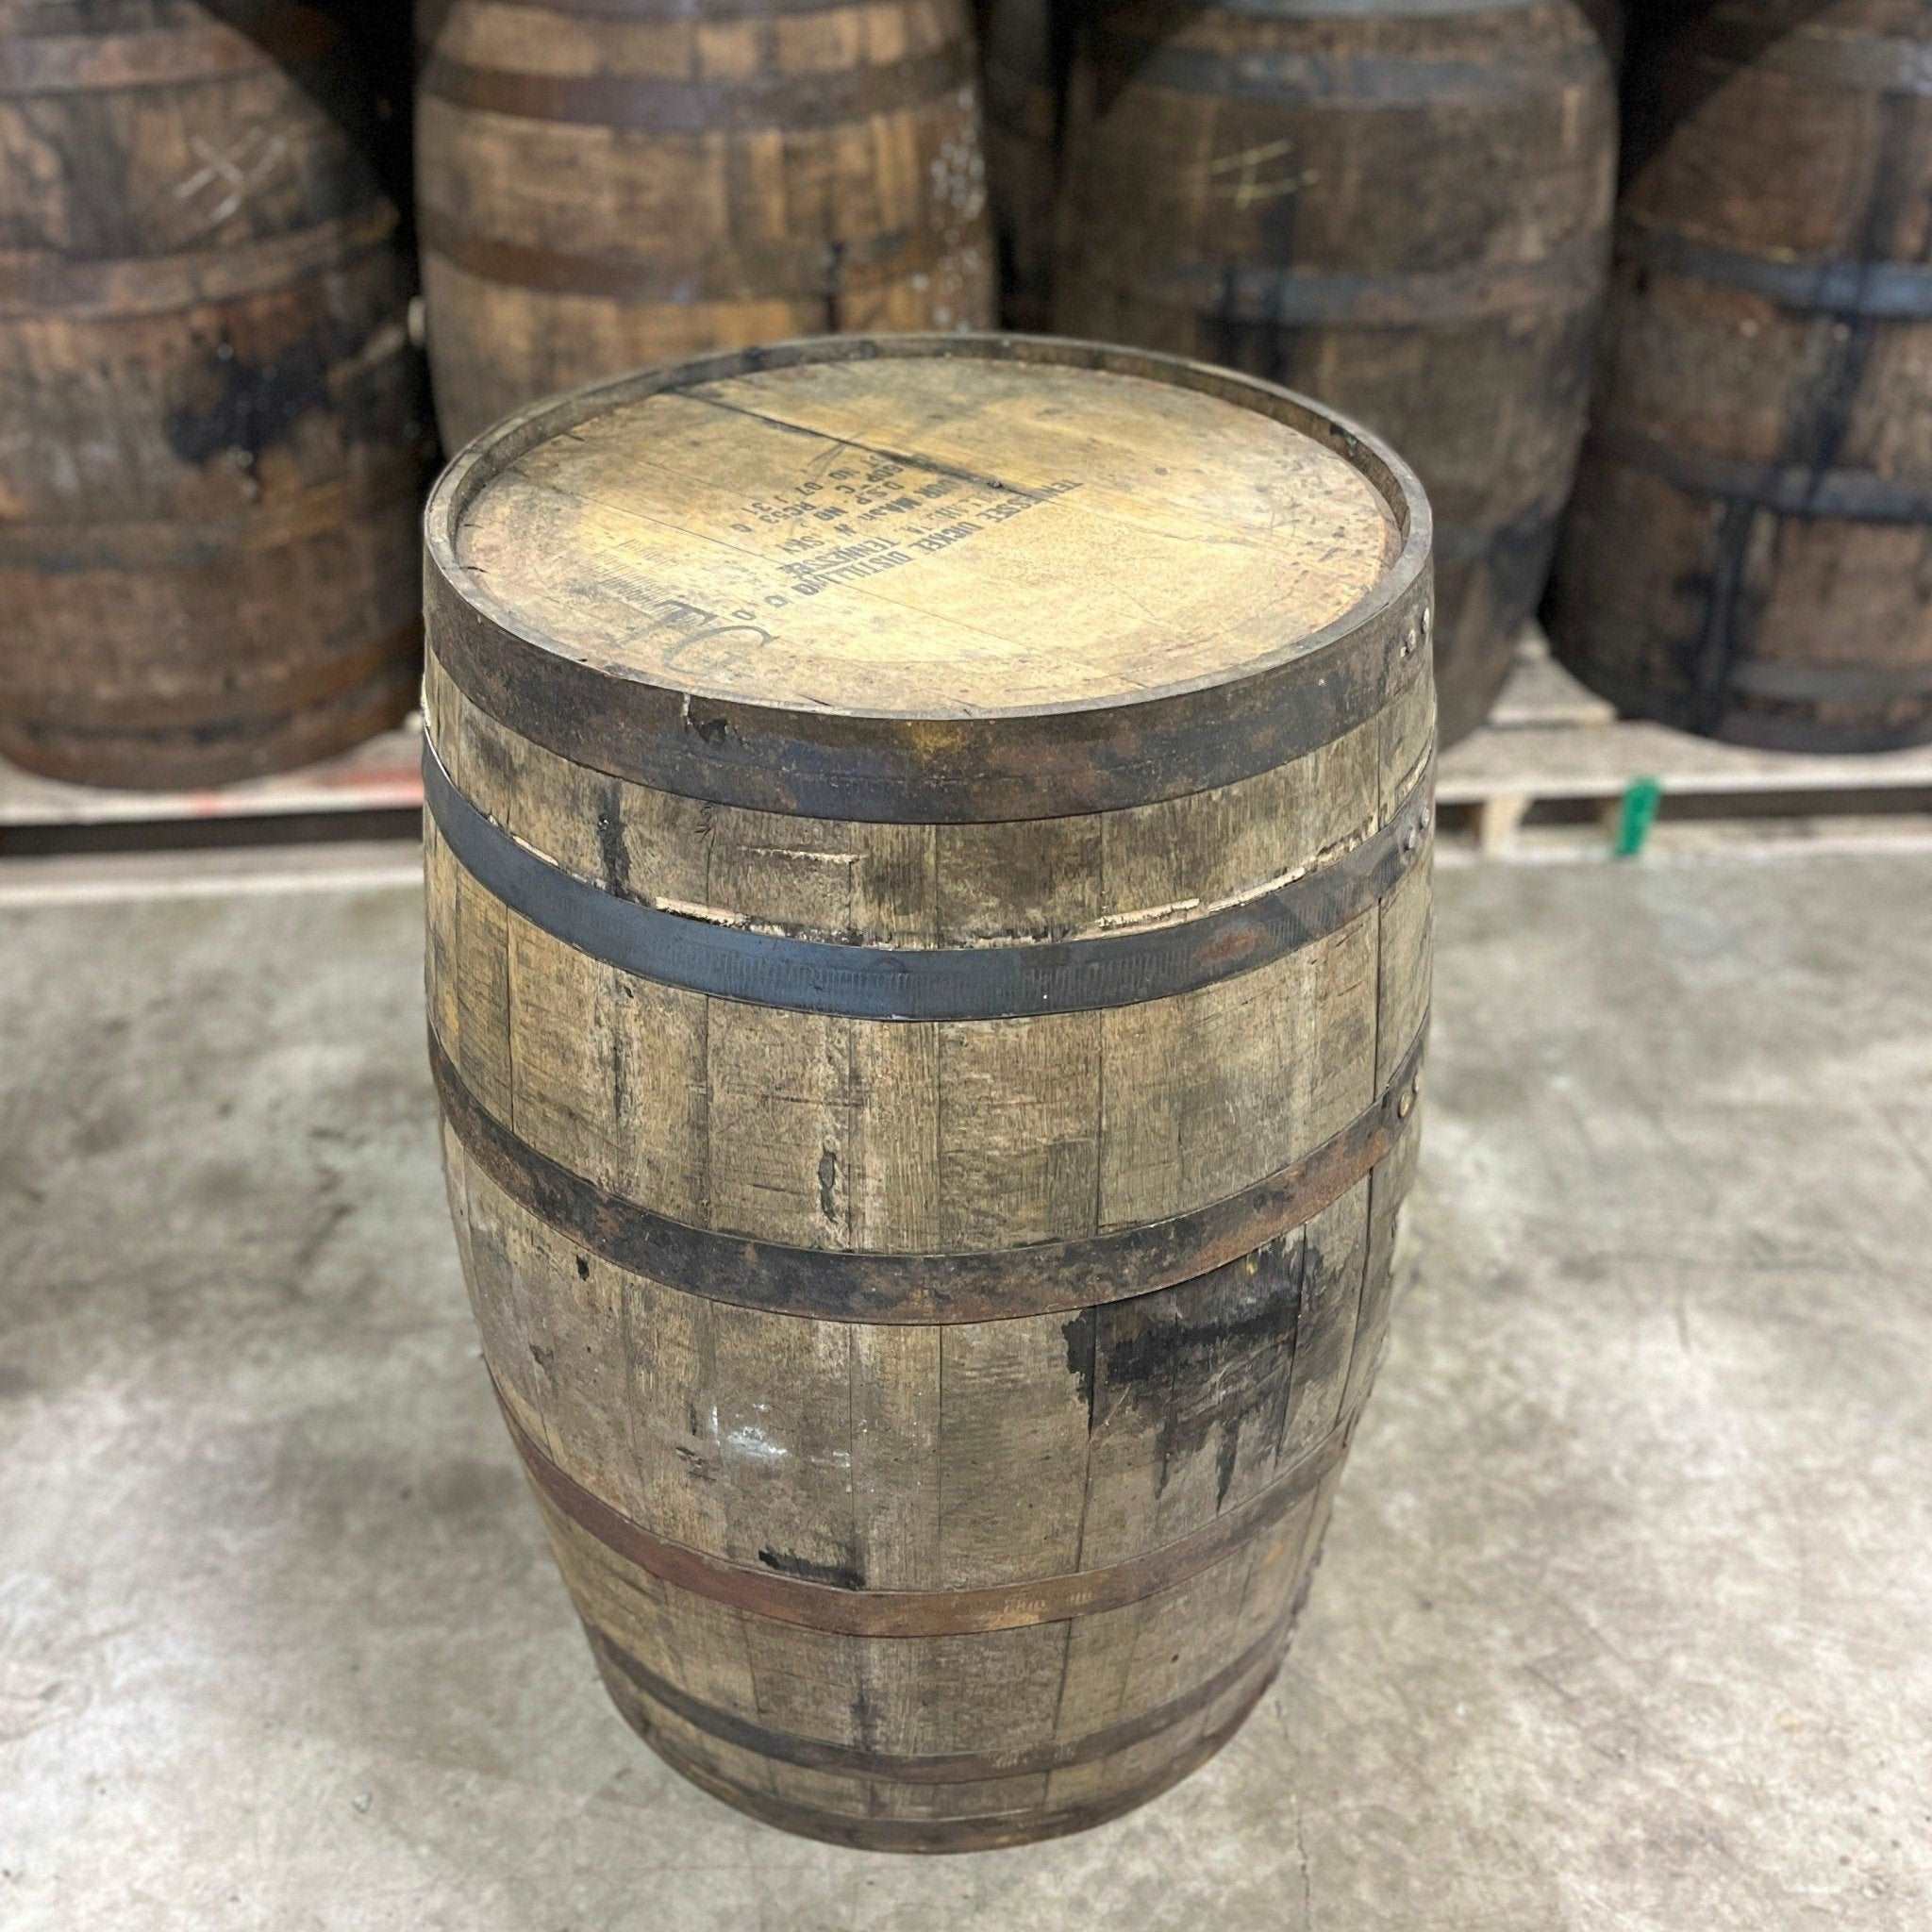 53 Gallon, 15 year George Dickel Bourbon Barrel - Fresh Empty, Once Used - The County Cooperage